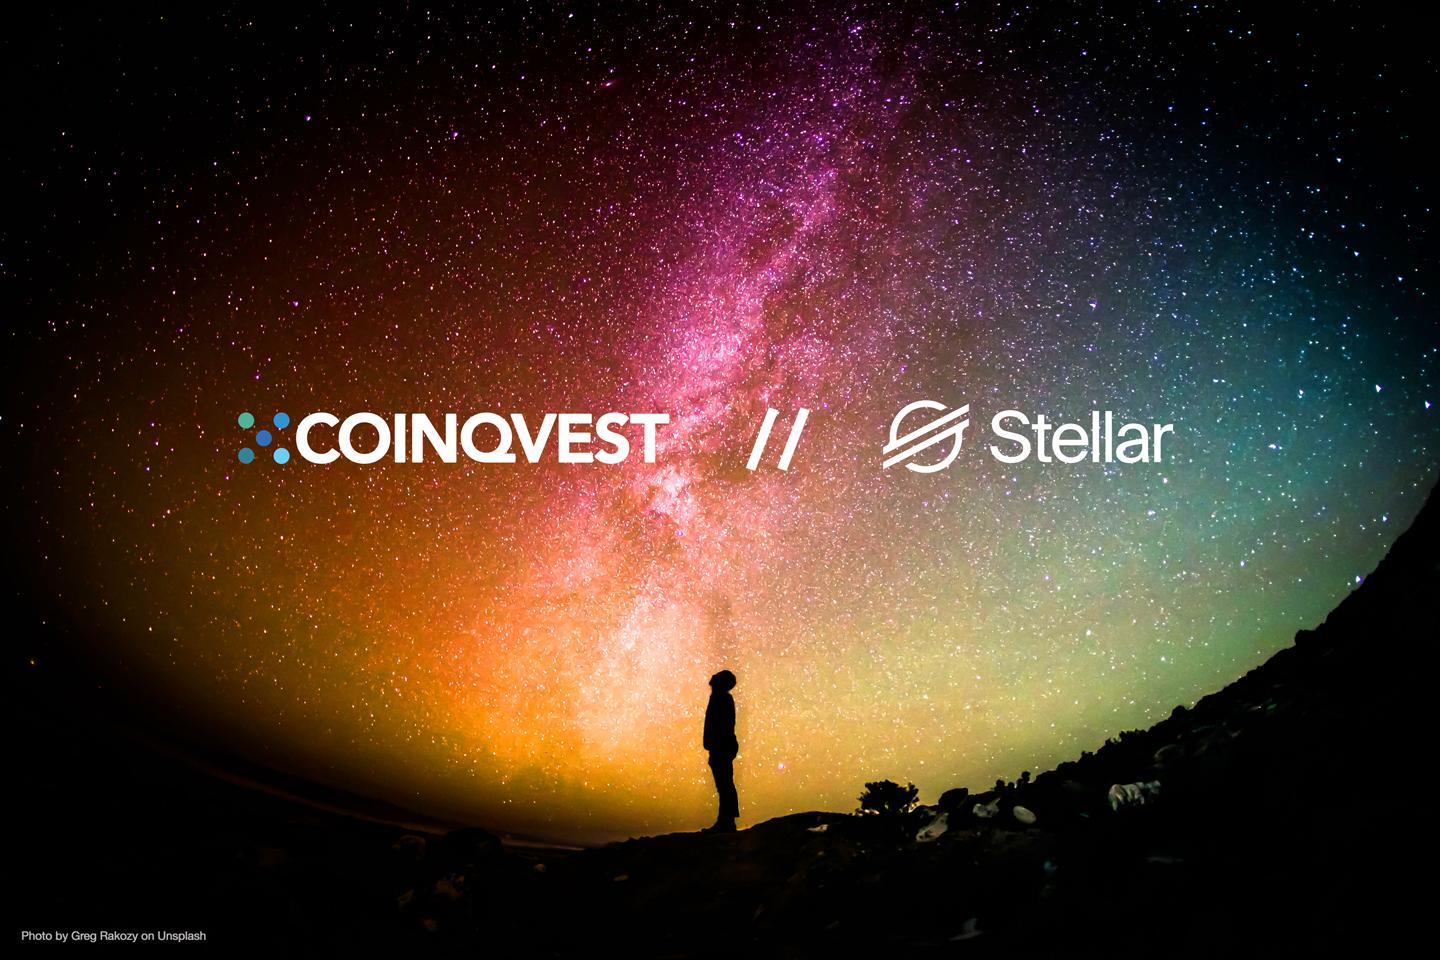 COINQVEST Launches Three Full Validators on the Stellar Network and Co-Establishes SCP Tier 1 Core Quorum Group